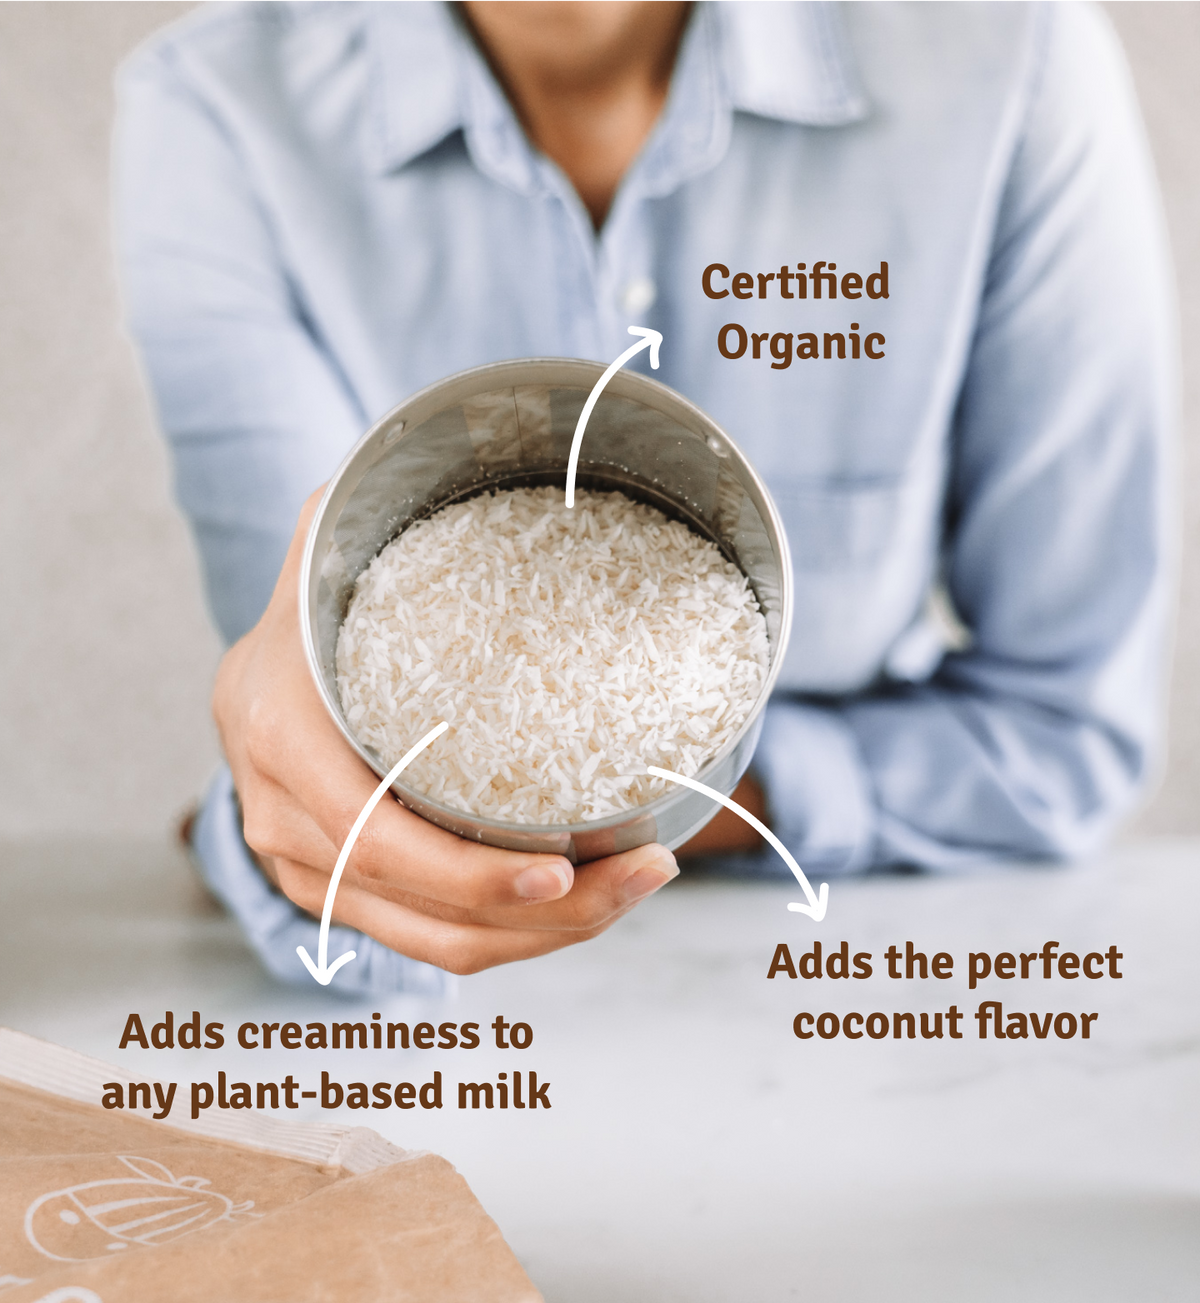 lifestyle organic shreds value features - certified organic adds creaminess to any plant-based milk adds the perfect coconut flavor 